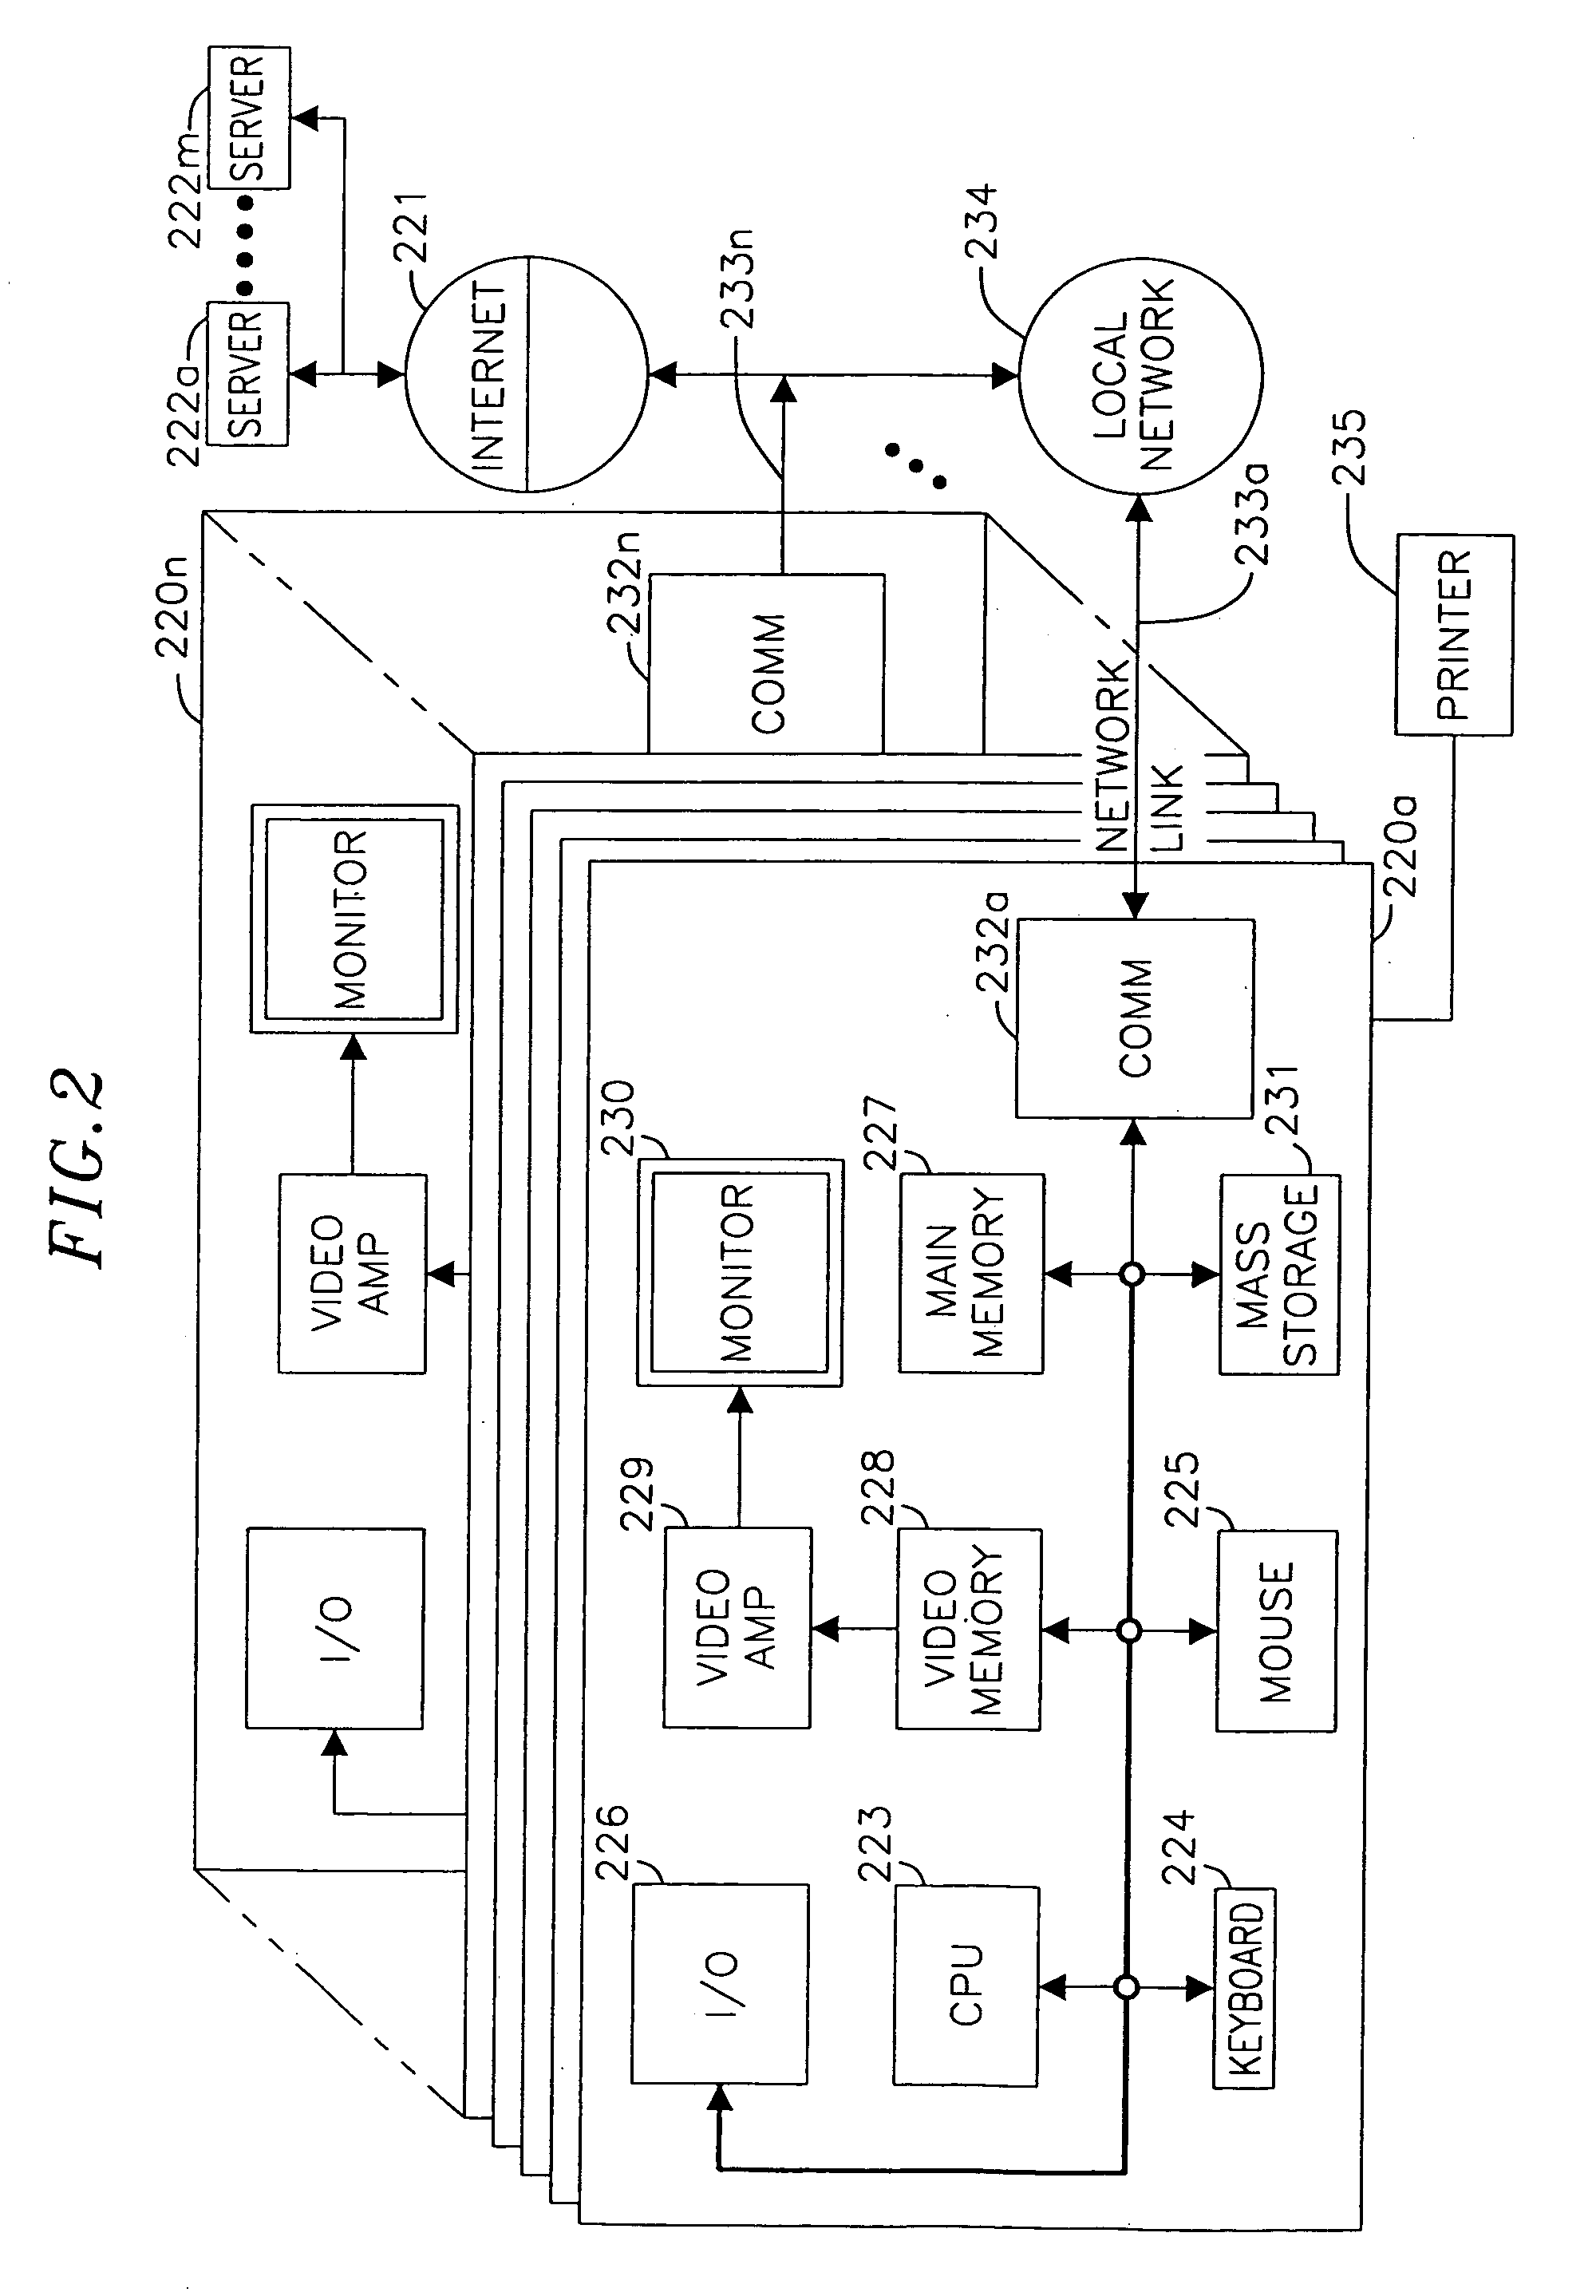 Cryptographic module for secure processing of value-bearing items